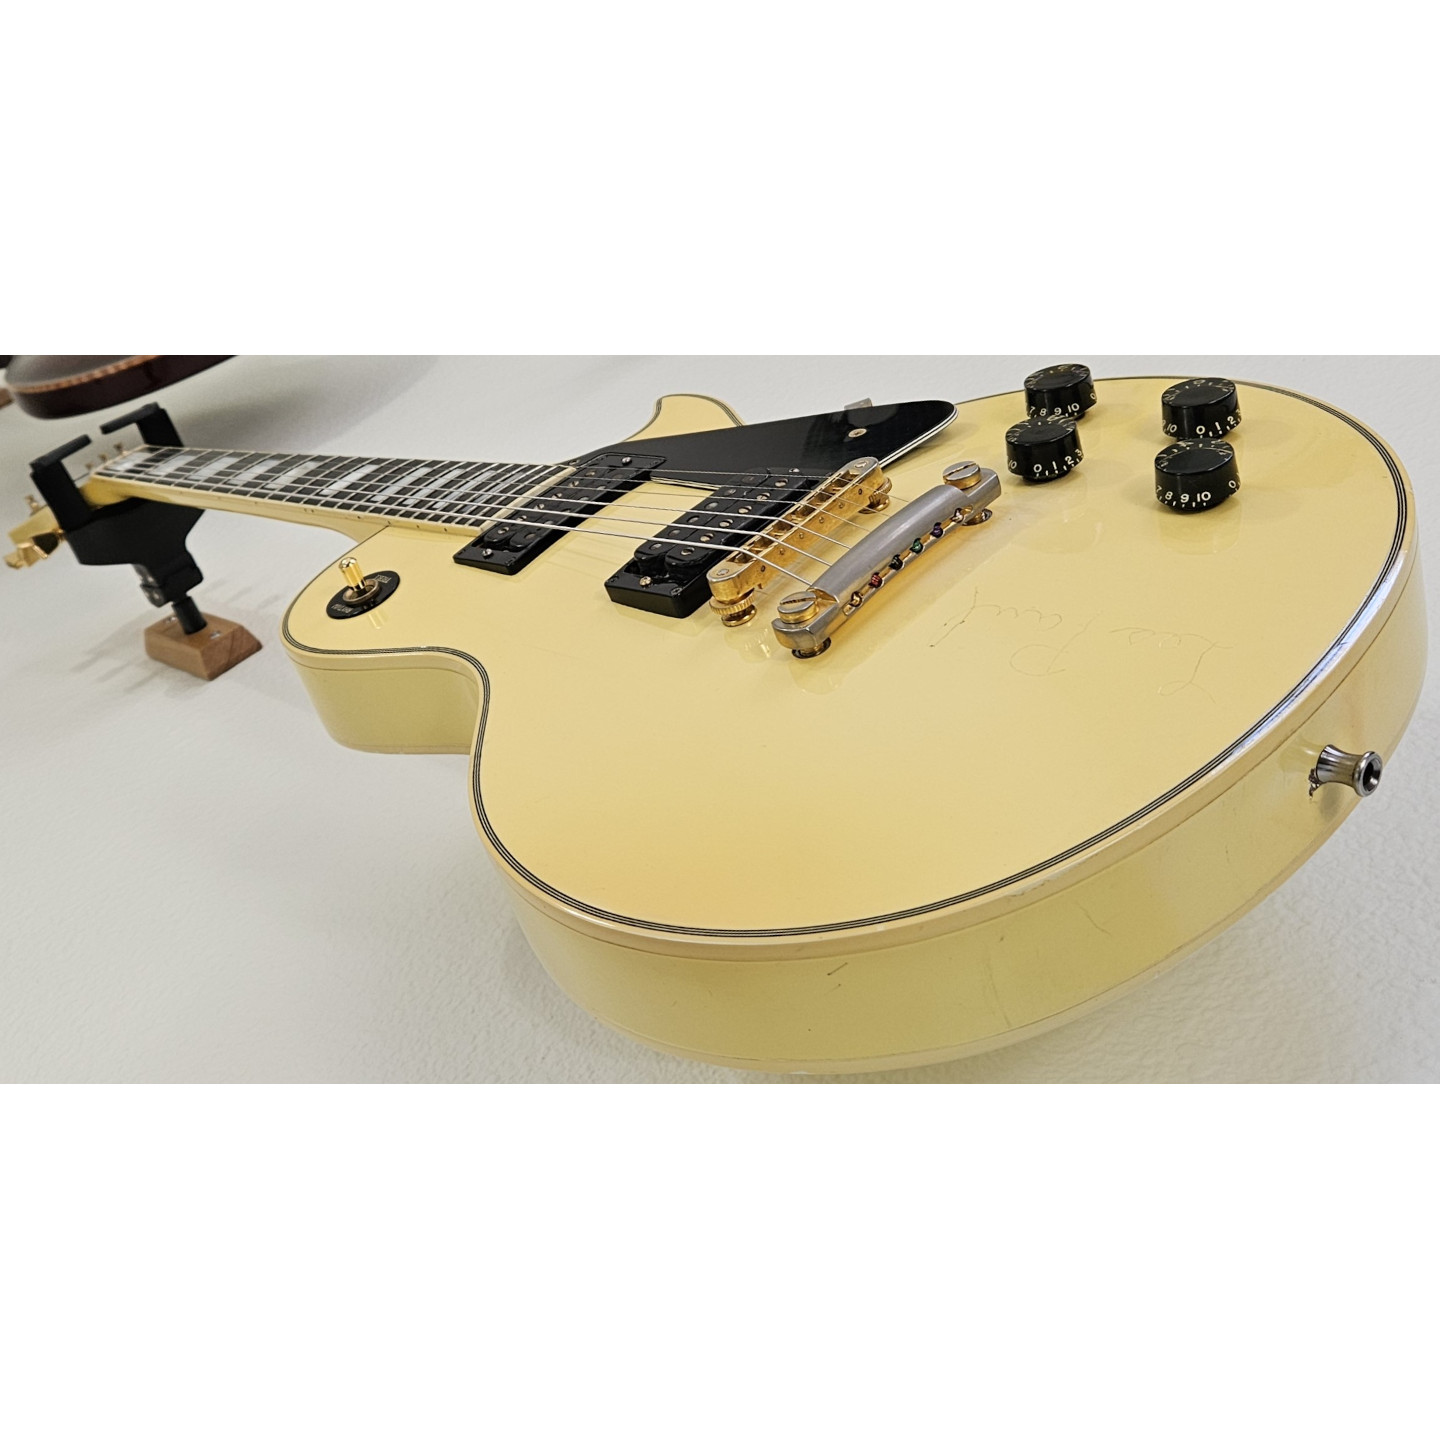 1981 Gibson Les Paul Custom (Signed by Les Paul) Alpine White OHSC Vintage Electric Guitar